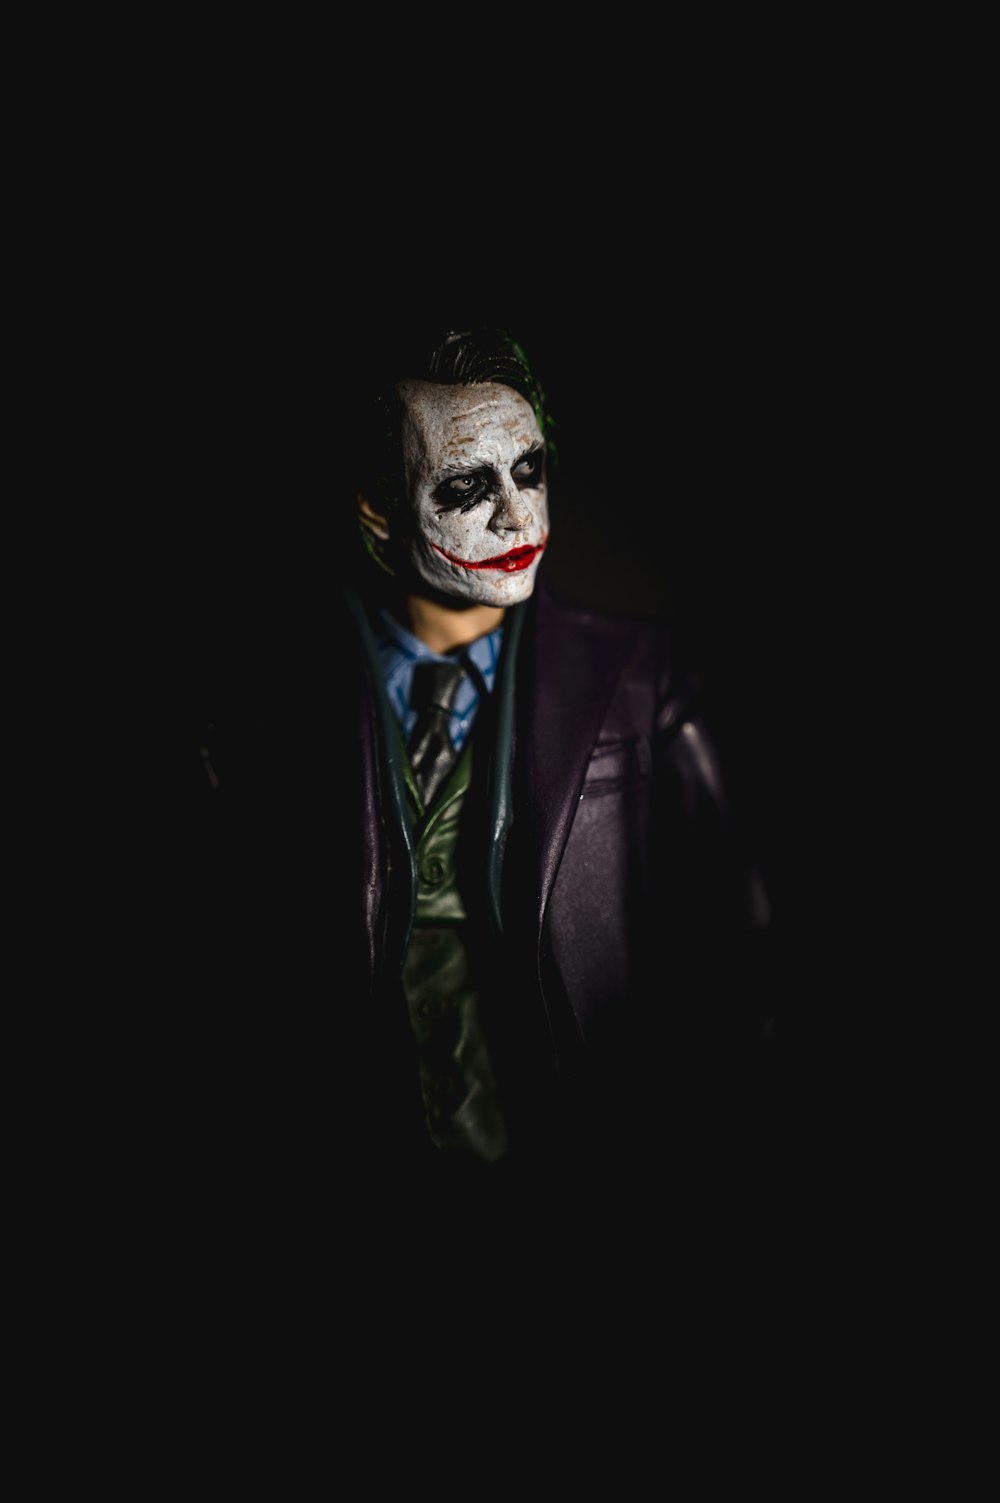 Awe-Inspiring Collection of Over 999 Joker Wallpapers in Full 4K Resolution